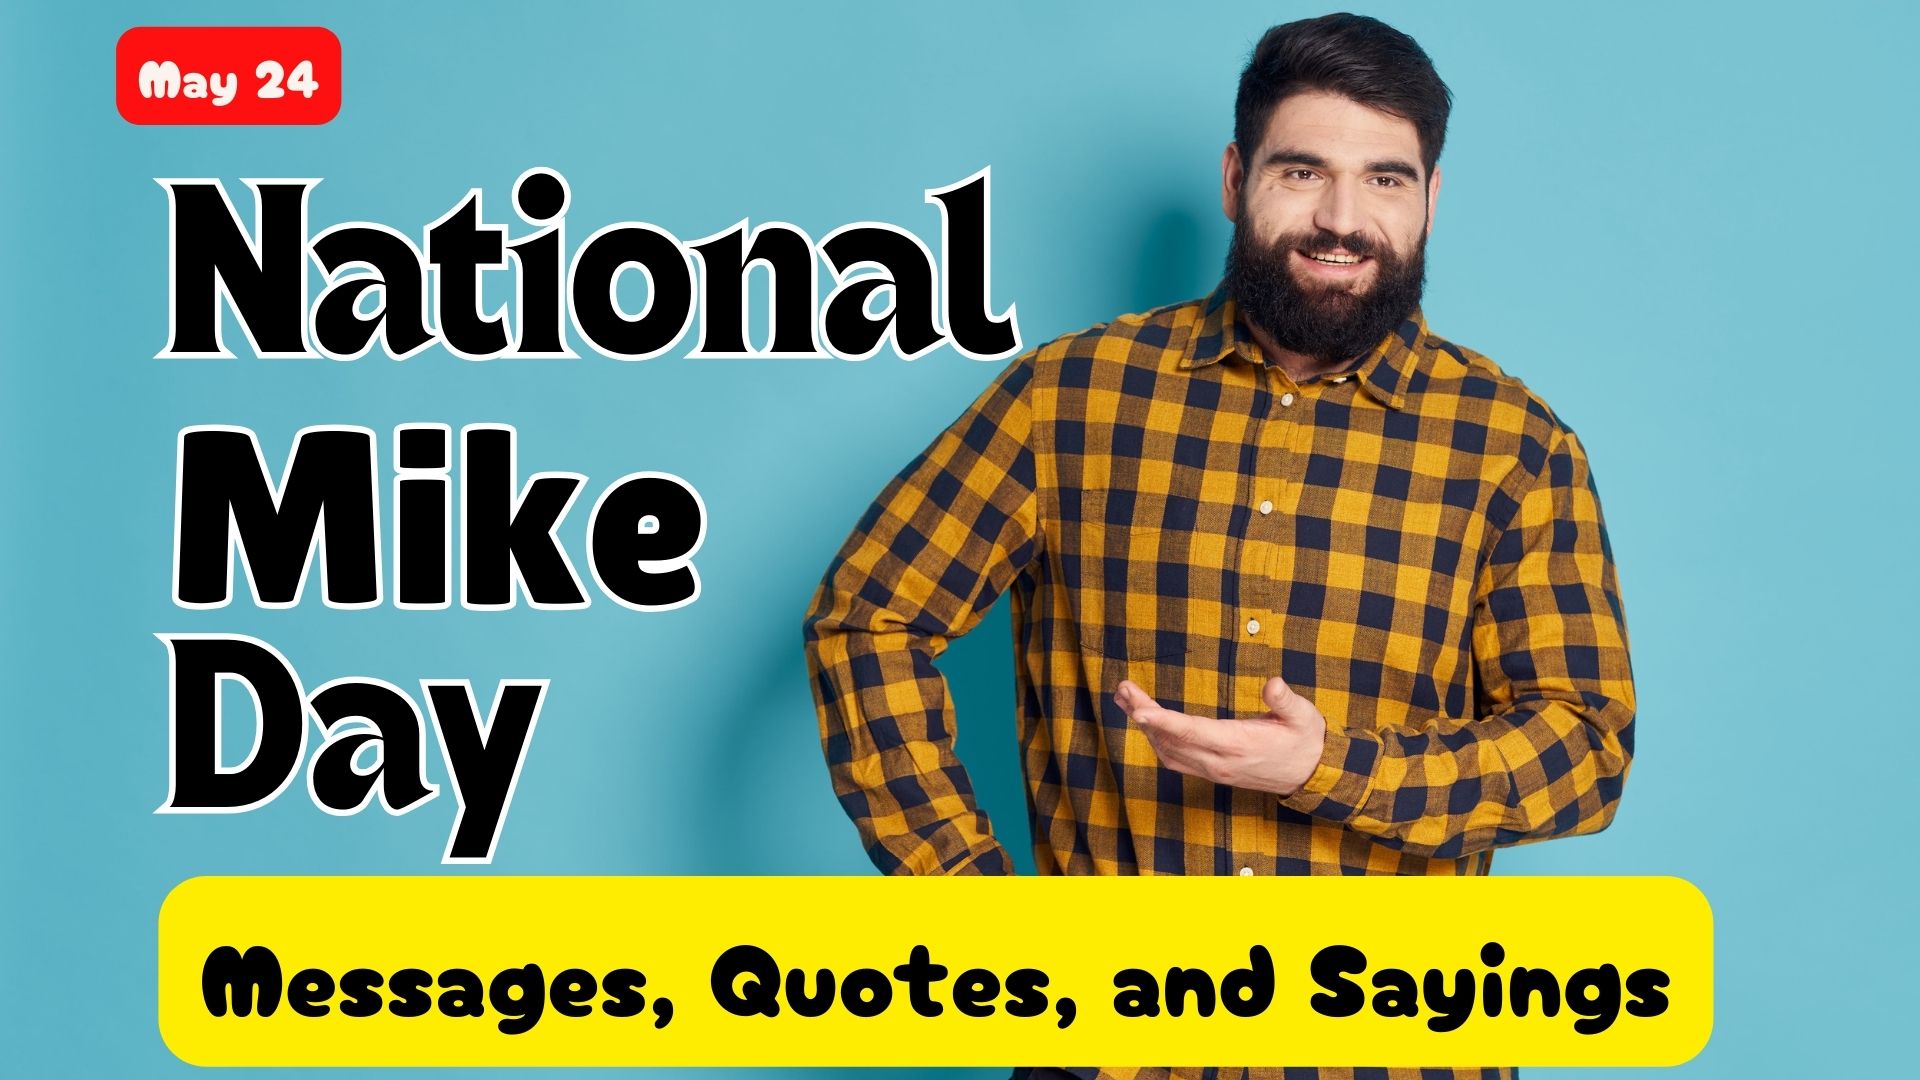 National Mike Day – May 24, Messages, Quotes & Greetings